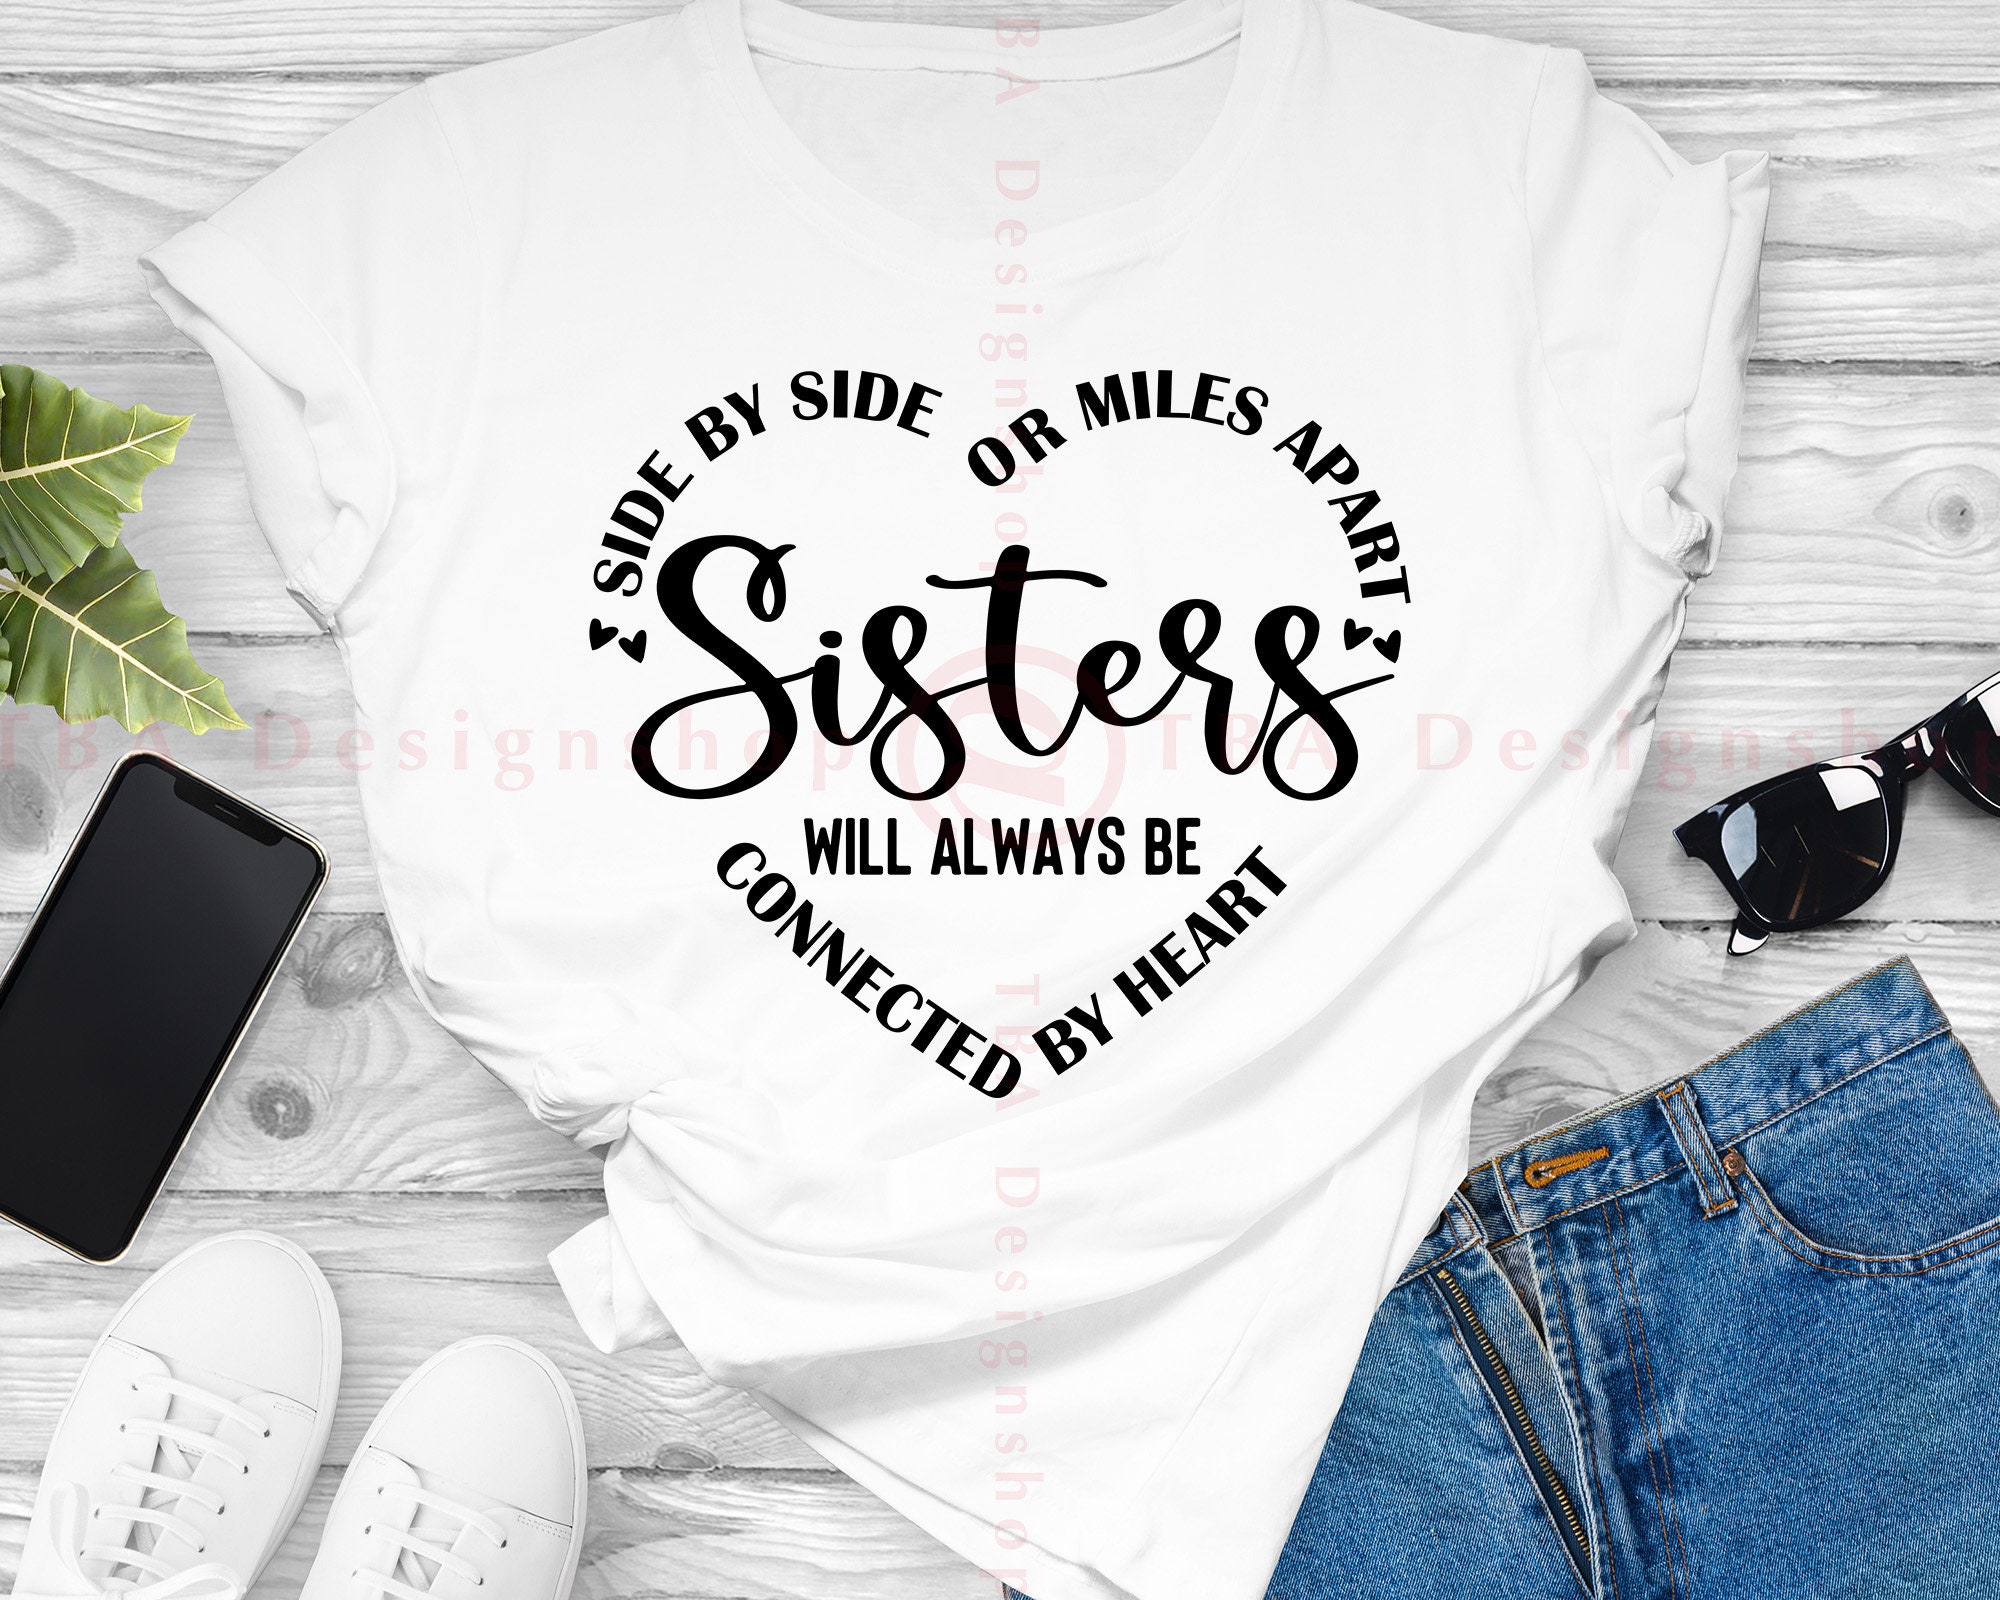 Sisters Will Always Be Connected by Heart, Personalized State